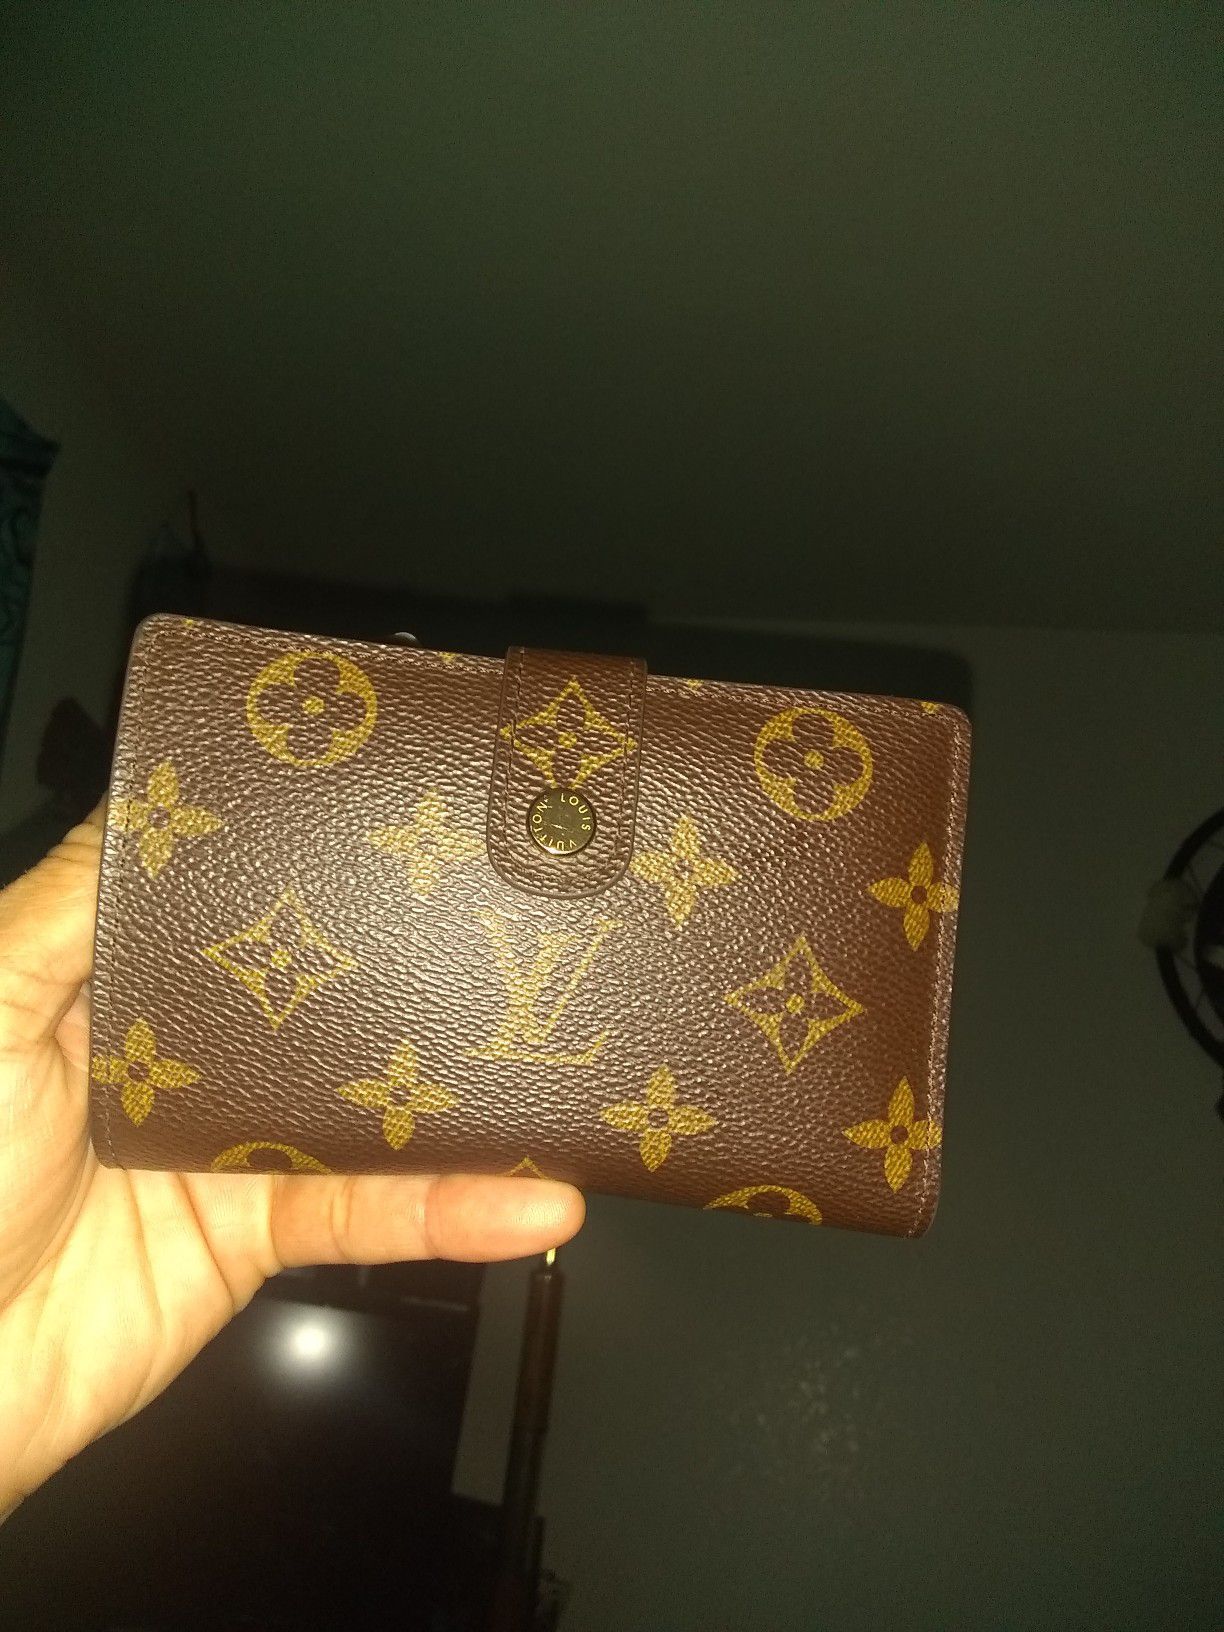 LV $200 (FIRM) No Lower Offers, No Flakes or You'll Be BLOCKED.